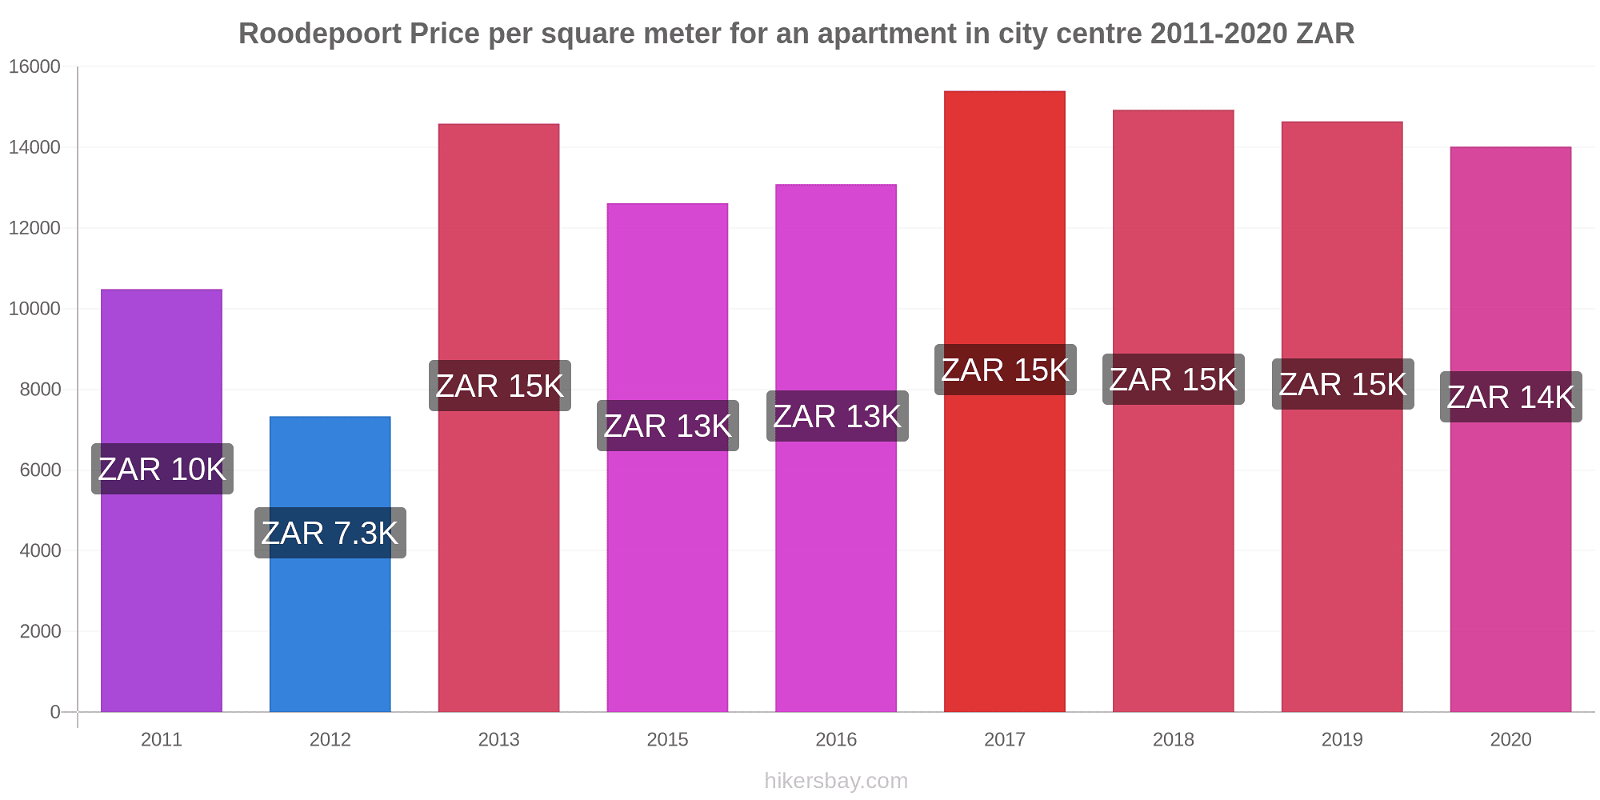 Roodepoort price changes Price per square meter for an apartment in city centre hikersbay.com